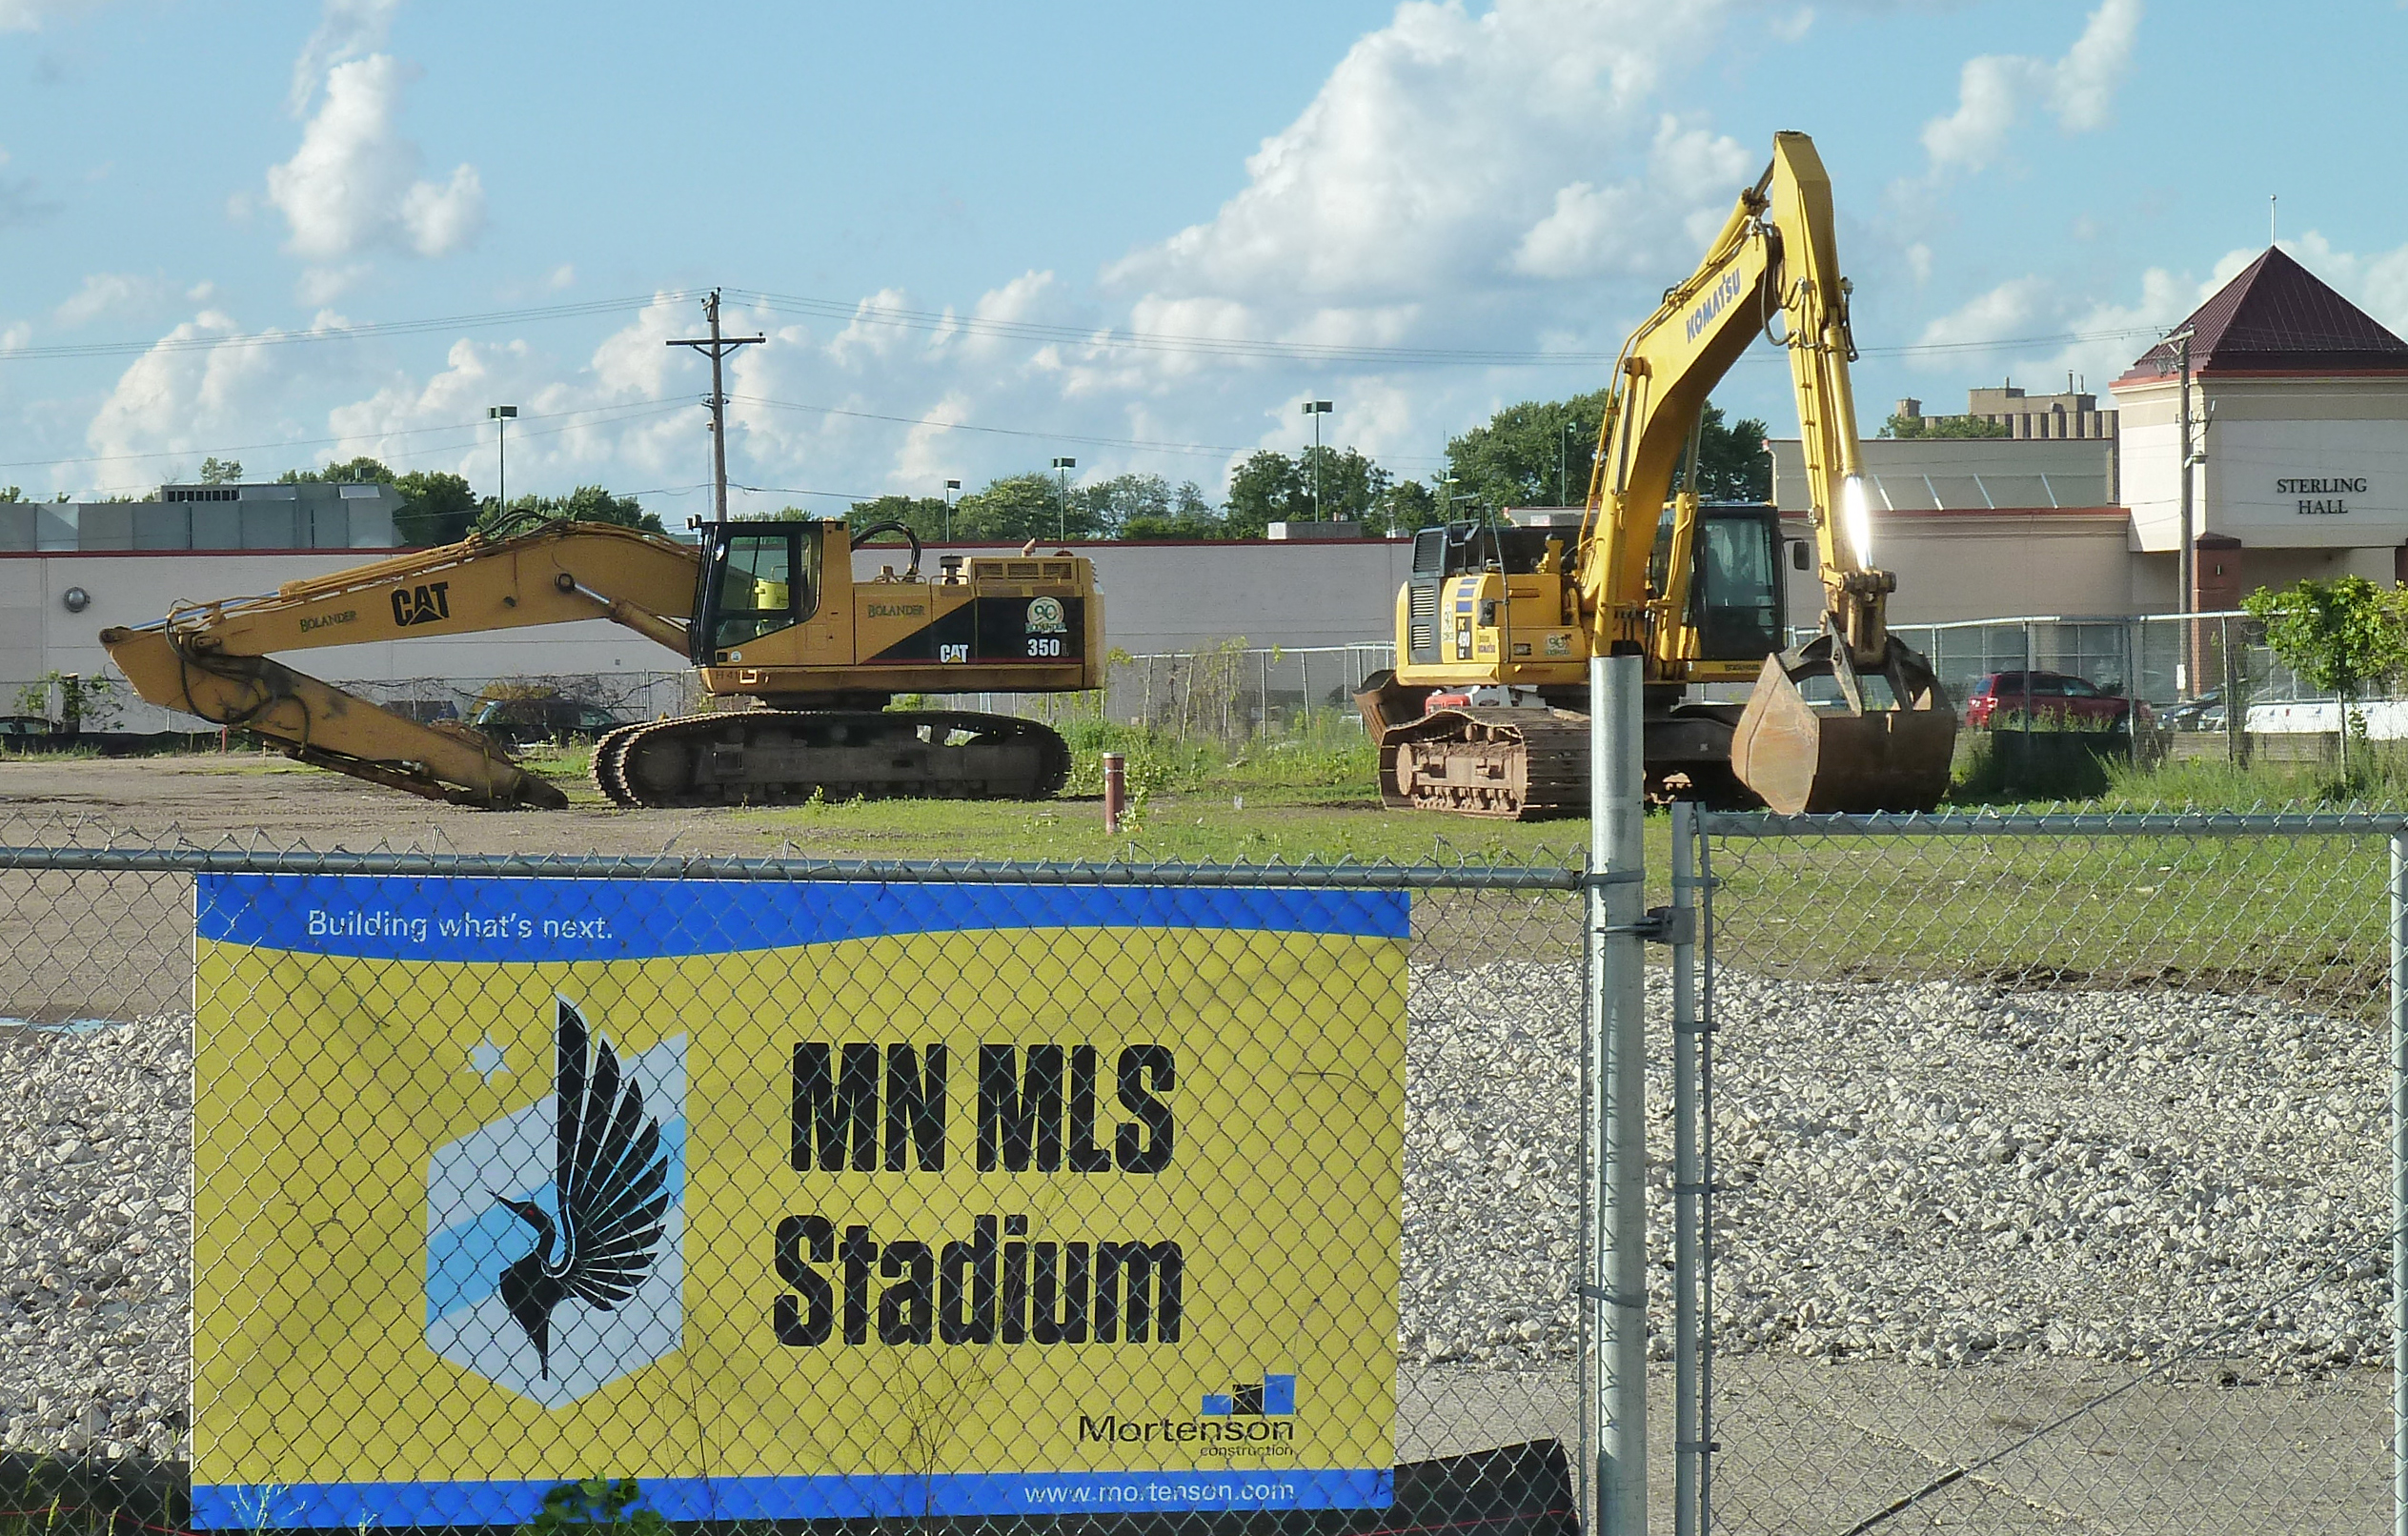 Minnesota United Midway Stadium Construction Finally Begins But Two Acres Remain to Be Purchased